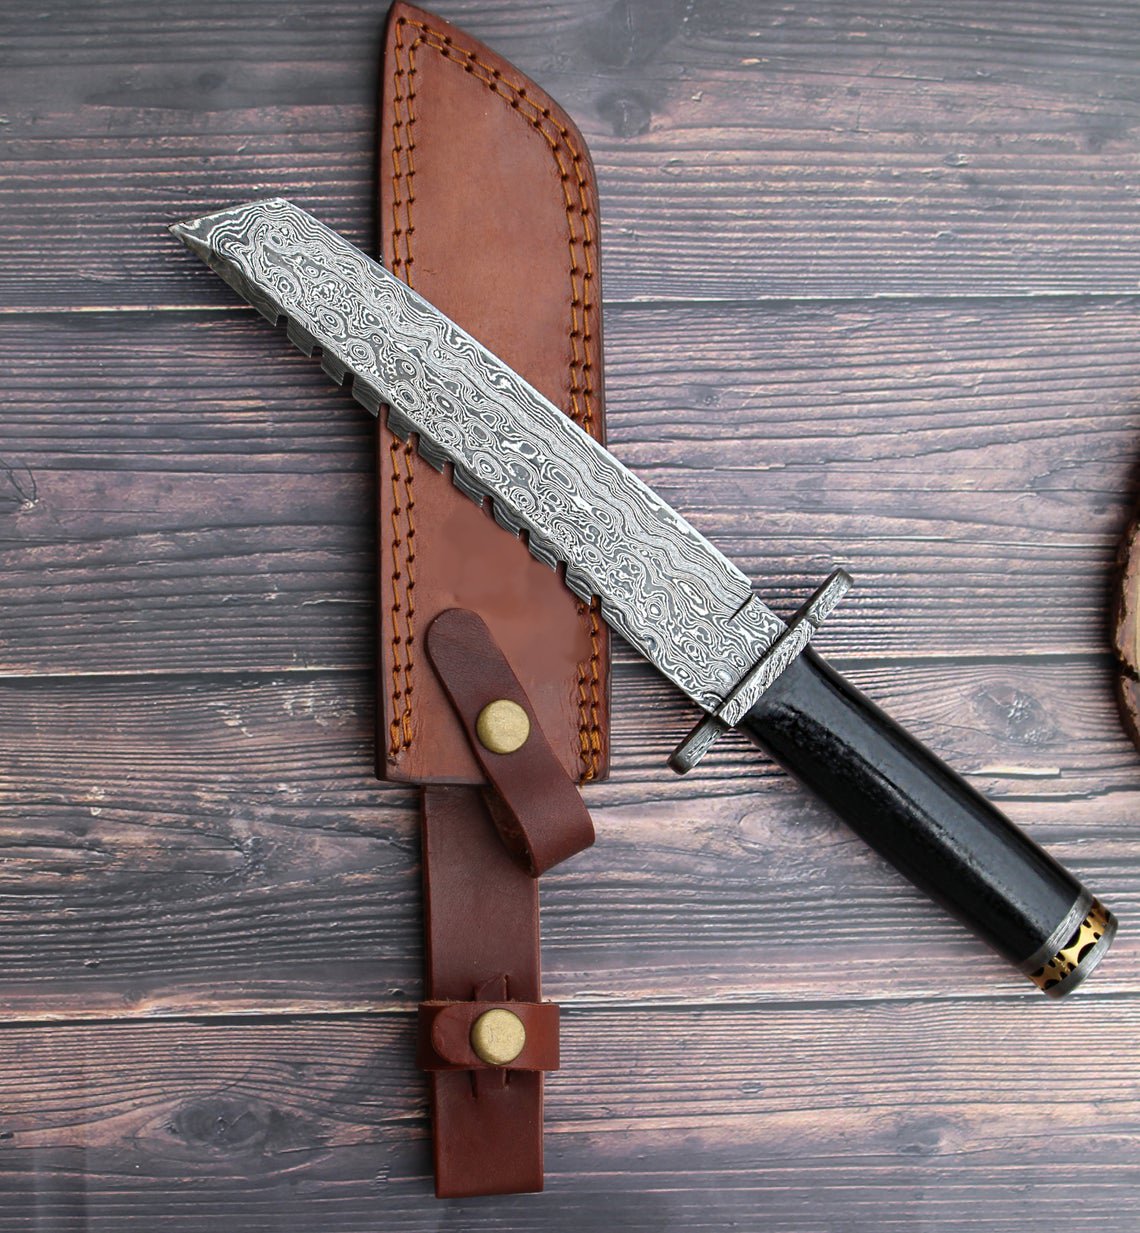 https://forgingblades.com/wp-content/uploads/2021/06/Damascus-steel-Survival-tactical-combact-serrated-tanto1.jpg